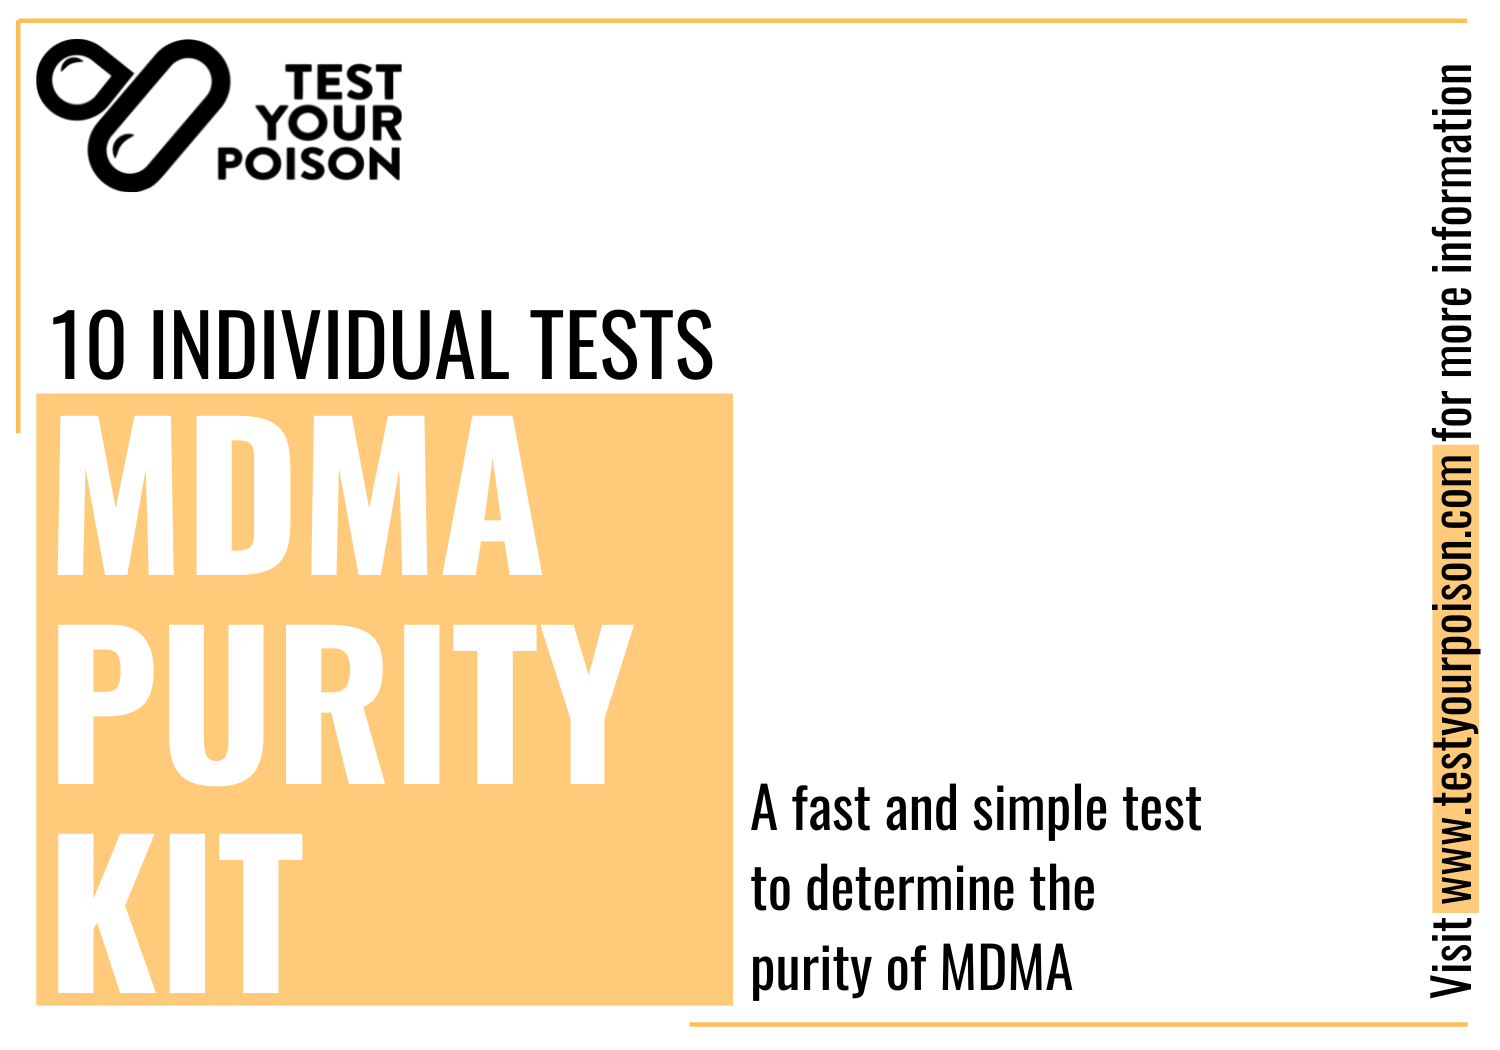 MDMA (Molly) Purity Test Kit Packaging